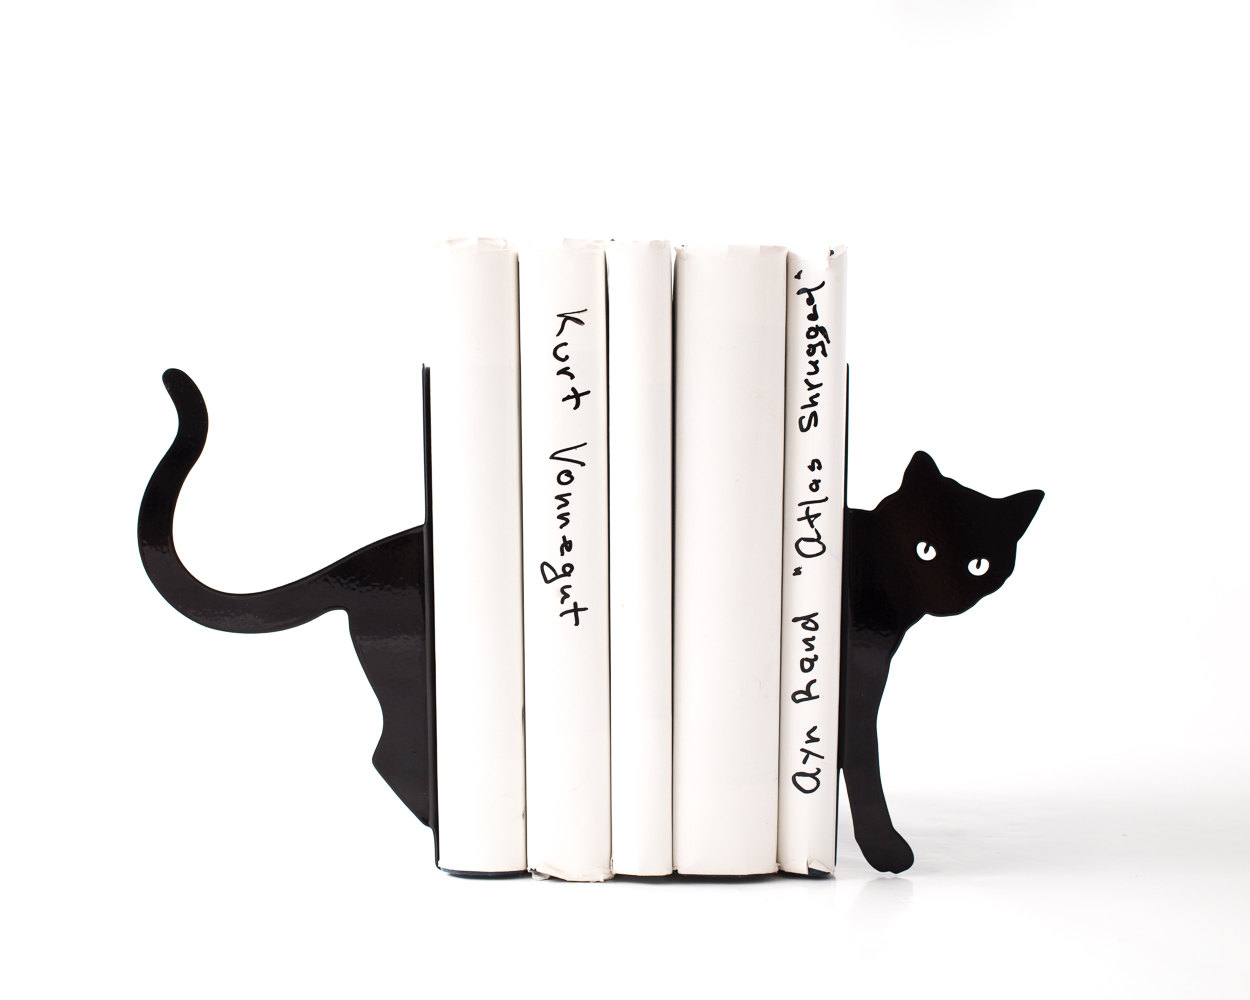 Trendy bookends